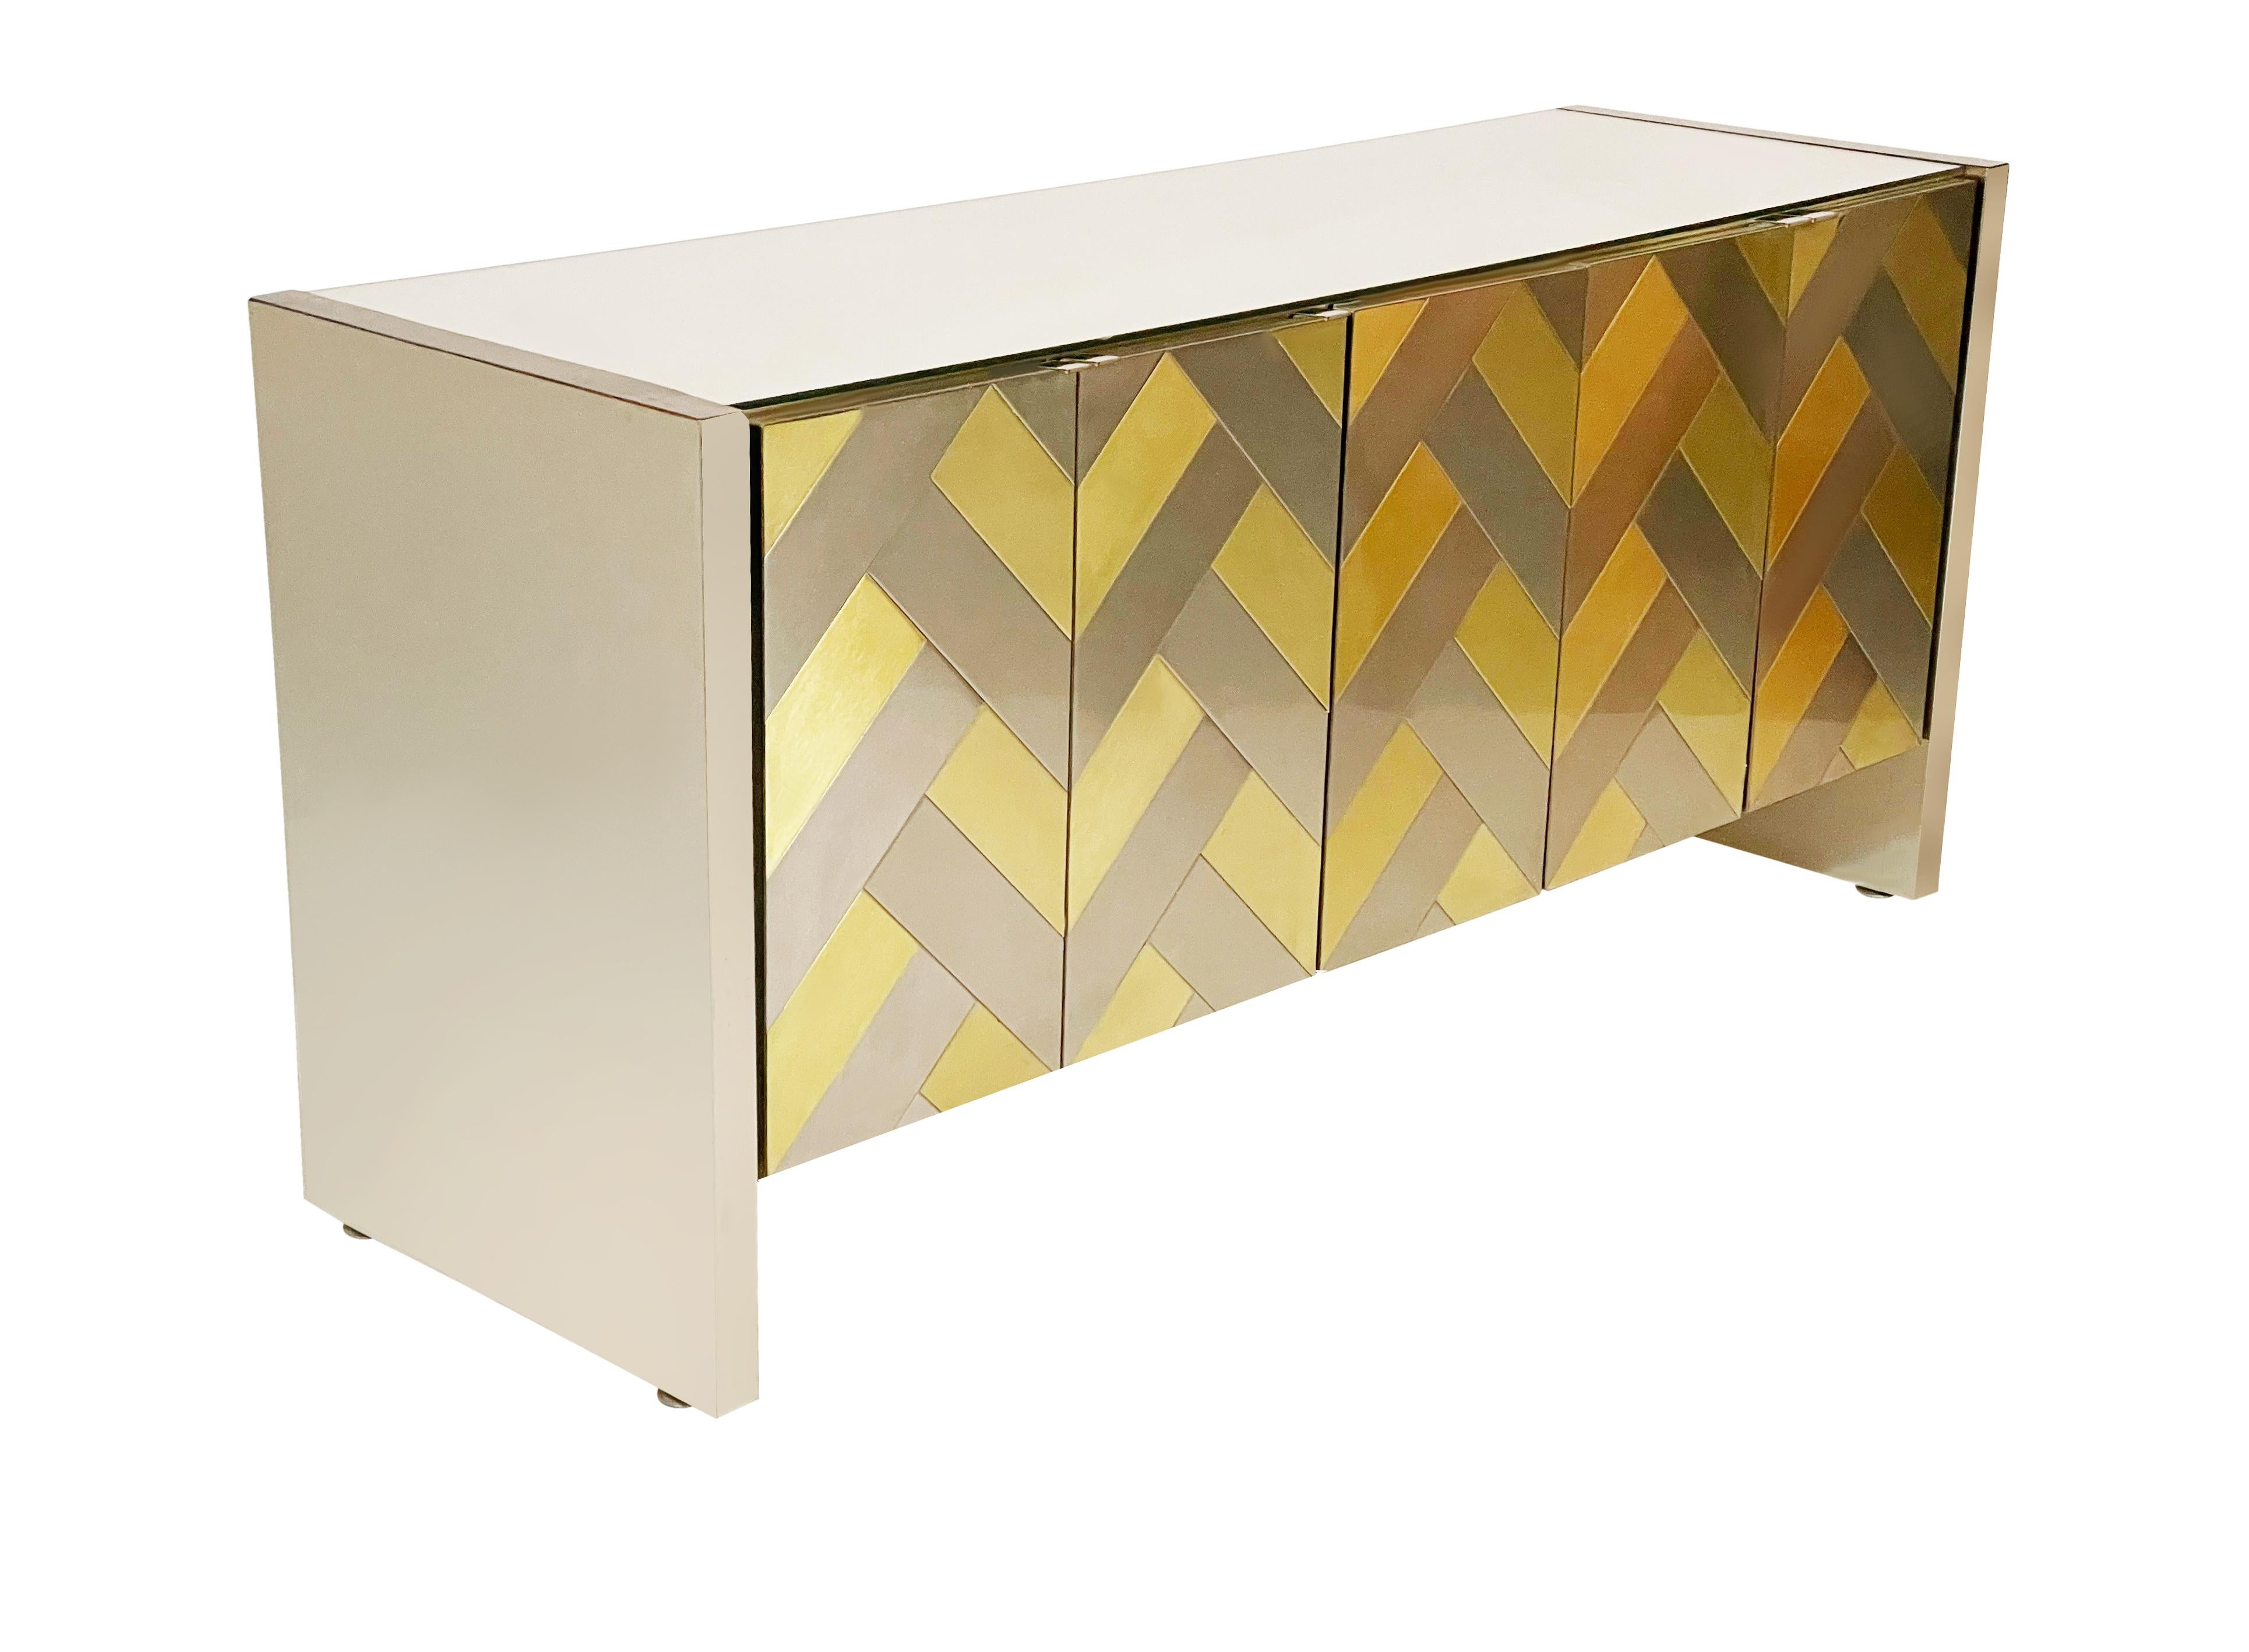 A stunning five door cabinet made by Ello circa 1970's. This hard to find model features brushed brass and brushed steel fronts in a herringbone / chevron design. The top is mirror and the sides are brushed steel. The interior has two adjustable